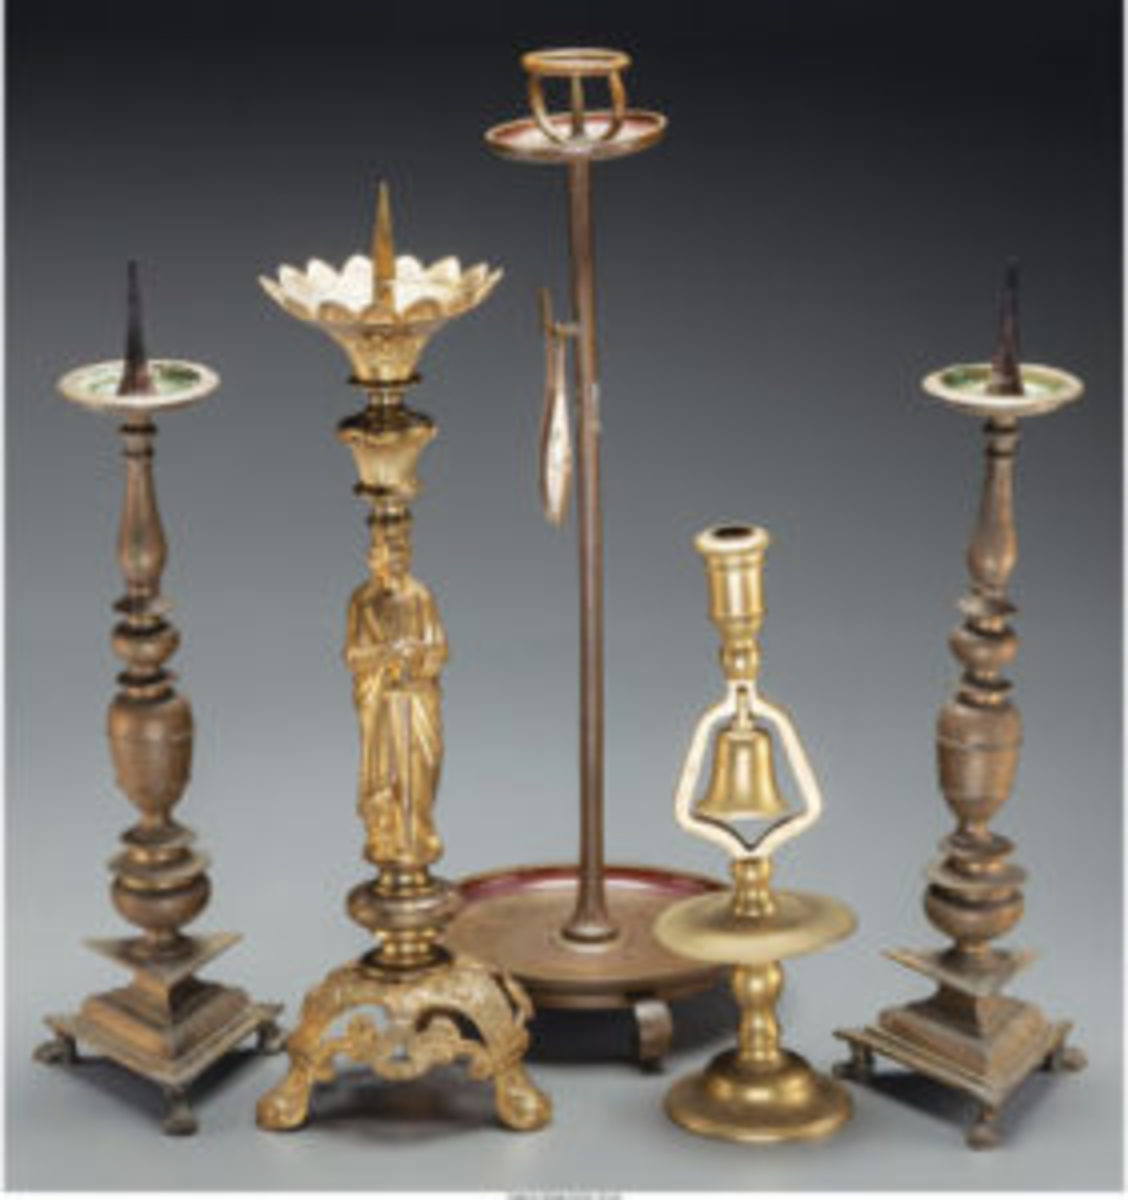 Candlesticks group including prickets, circa 19-20th centuries, tallest 21-3/4” h., $400 Heritage Auctions, www.HA.com